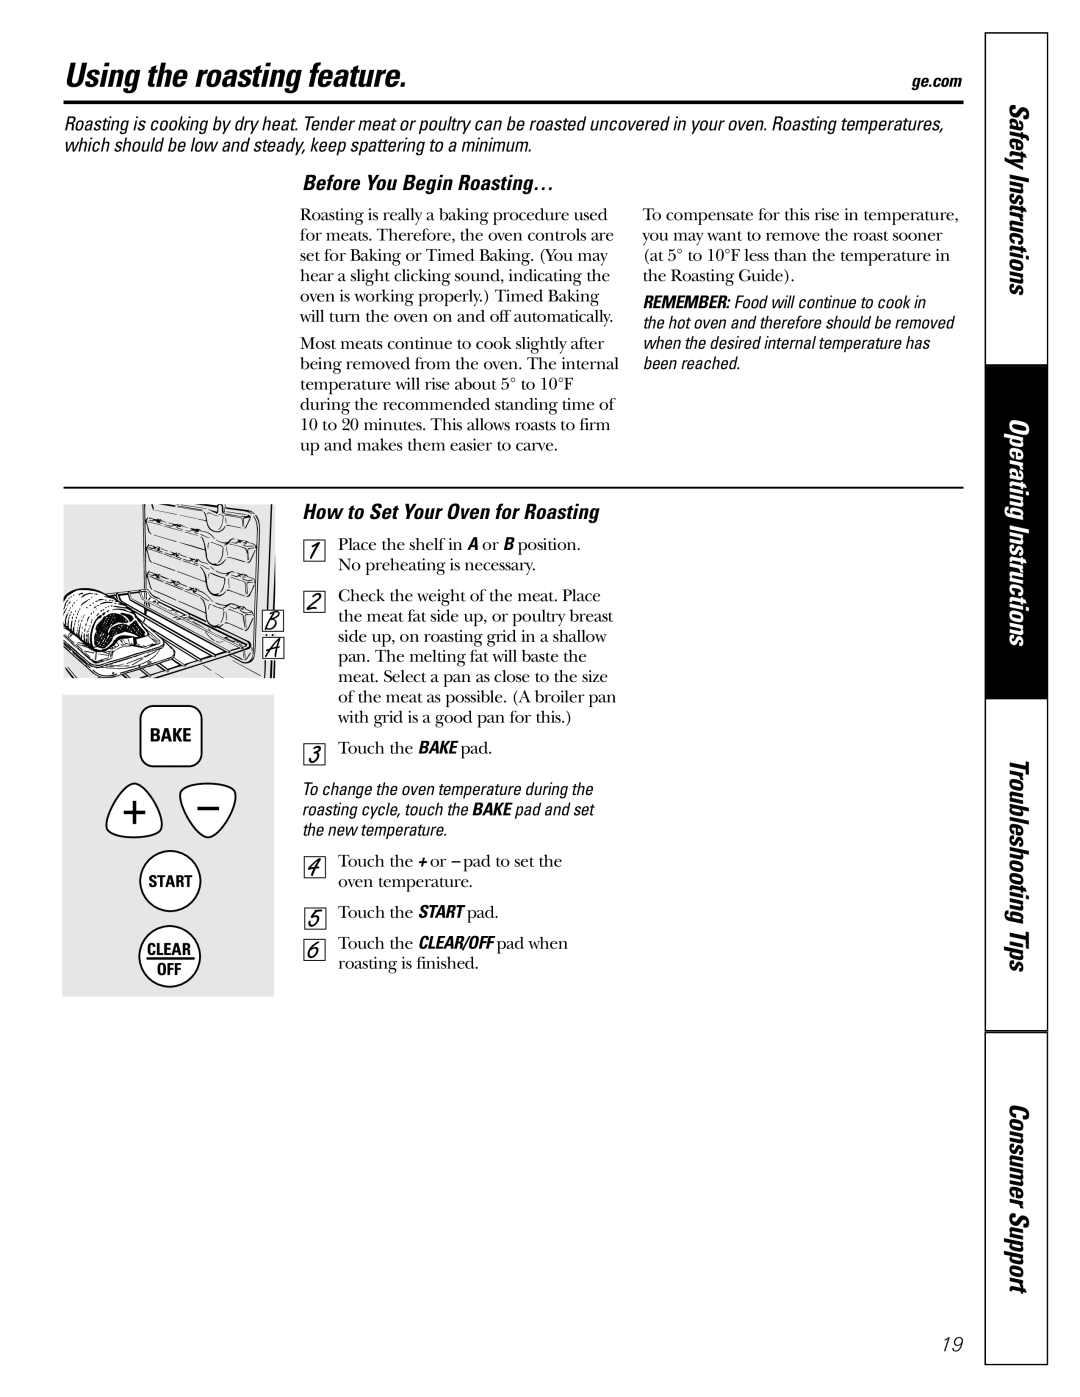 GE JGRP20 Using the roasting feature, Safety, Before You Begin Roasting…, How to Set Your Oven for Roasting, Instructions 